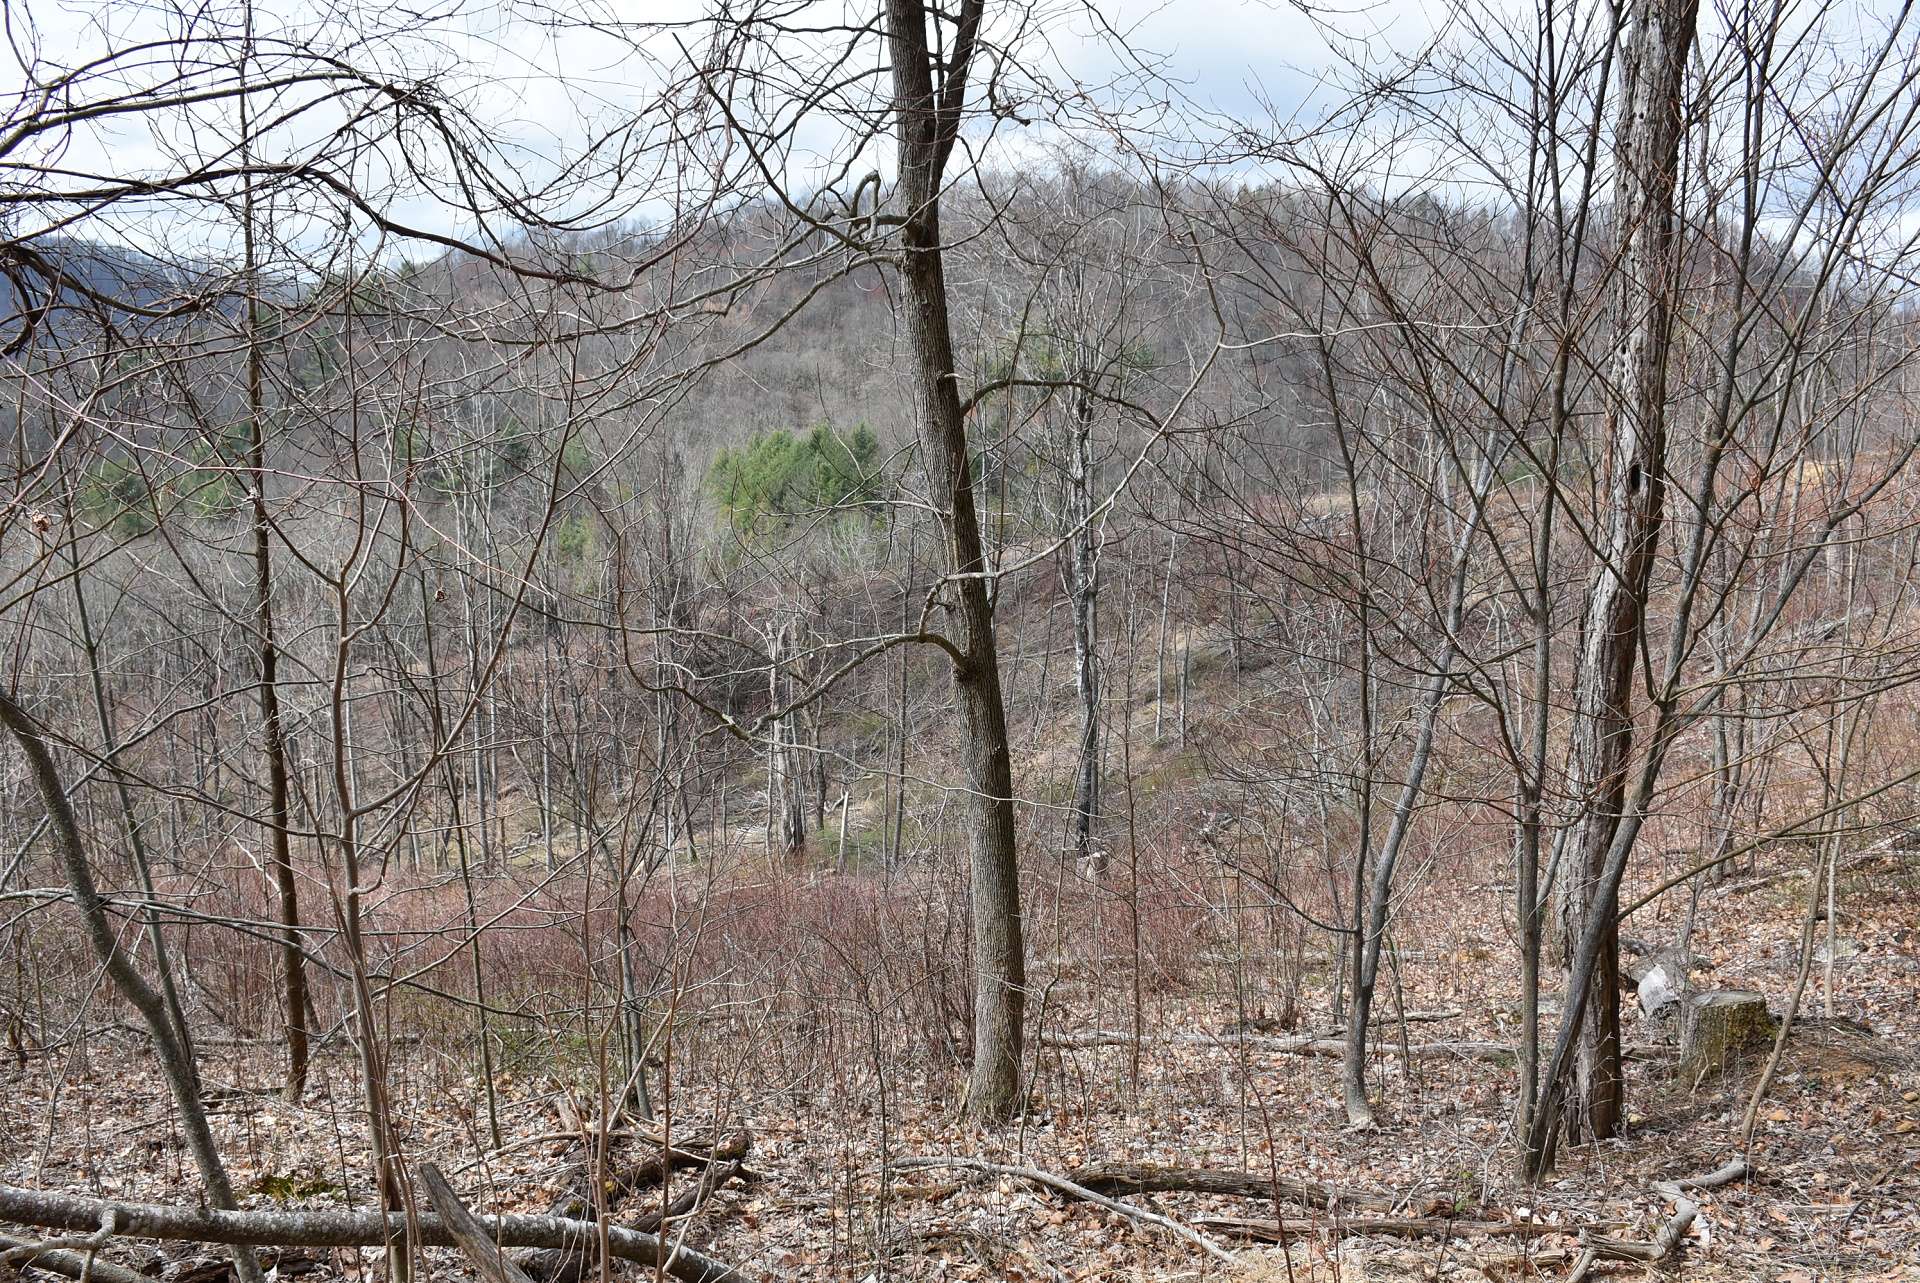 Shhhhhhh….you might catch a glimpse of a whitetail deer, turkey, grouse, or even a black bear.